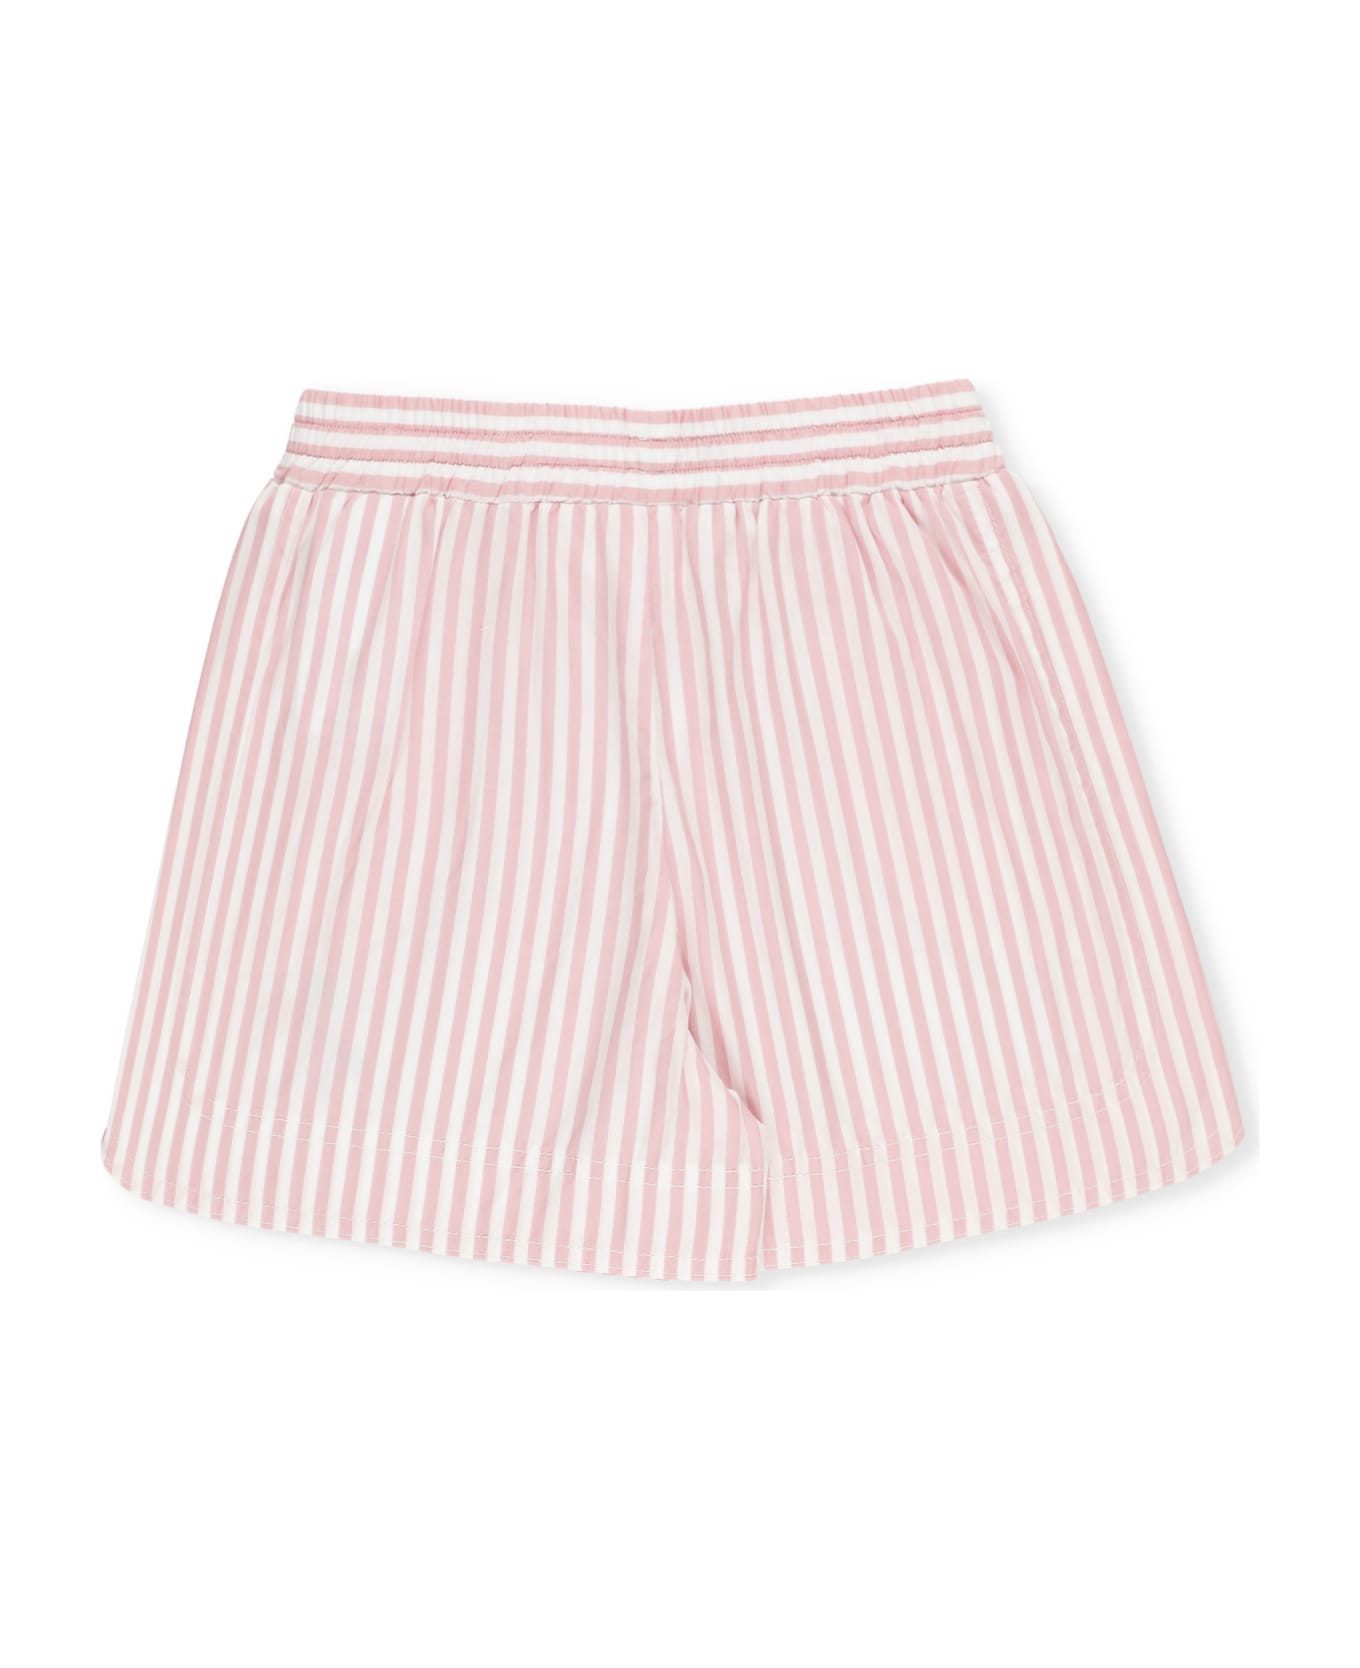 Palm Angels Striped Shorts - Pink